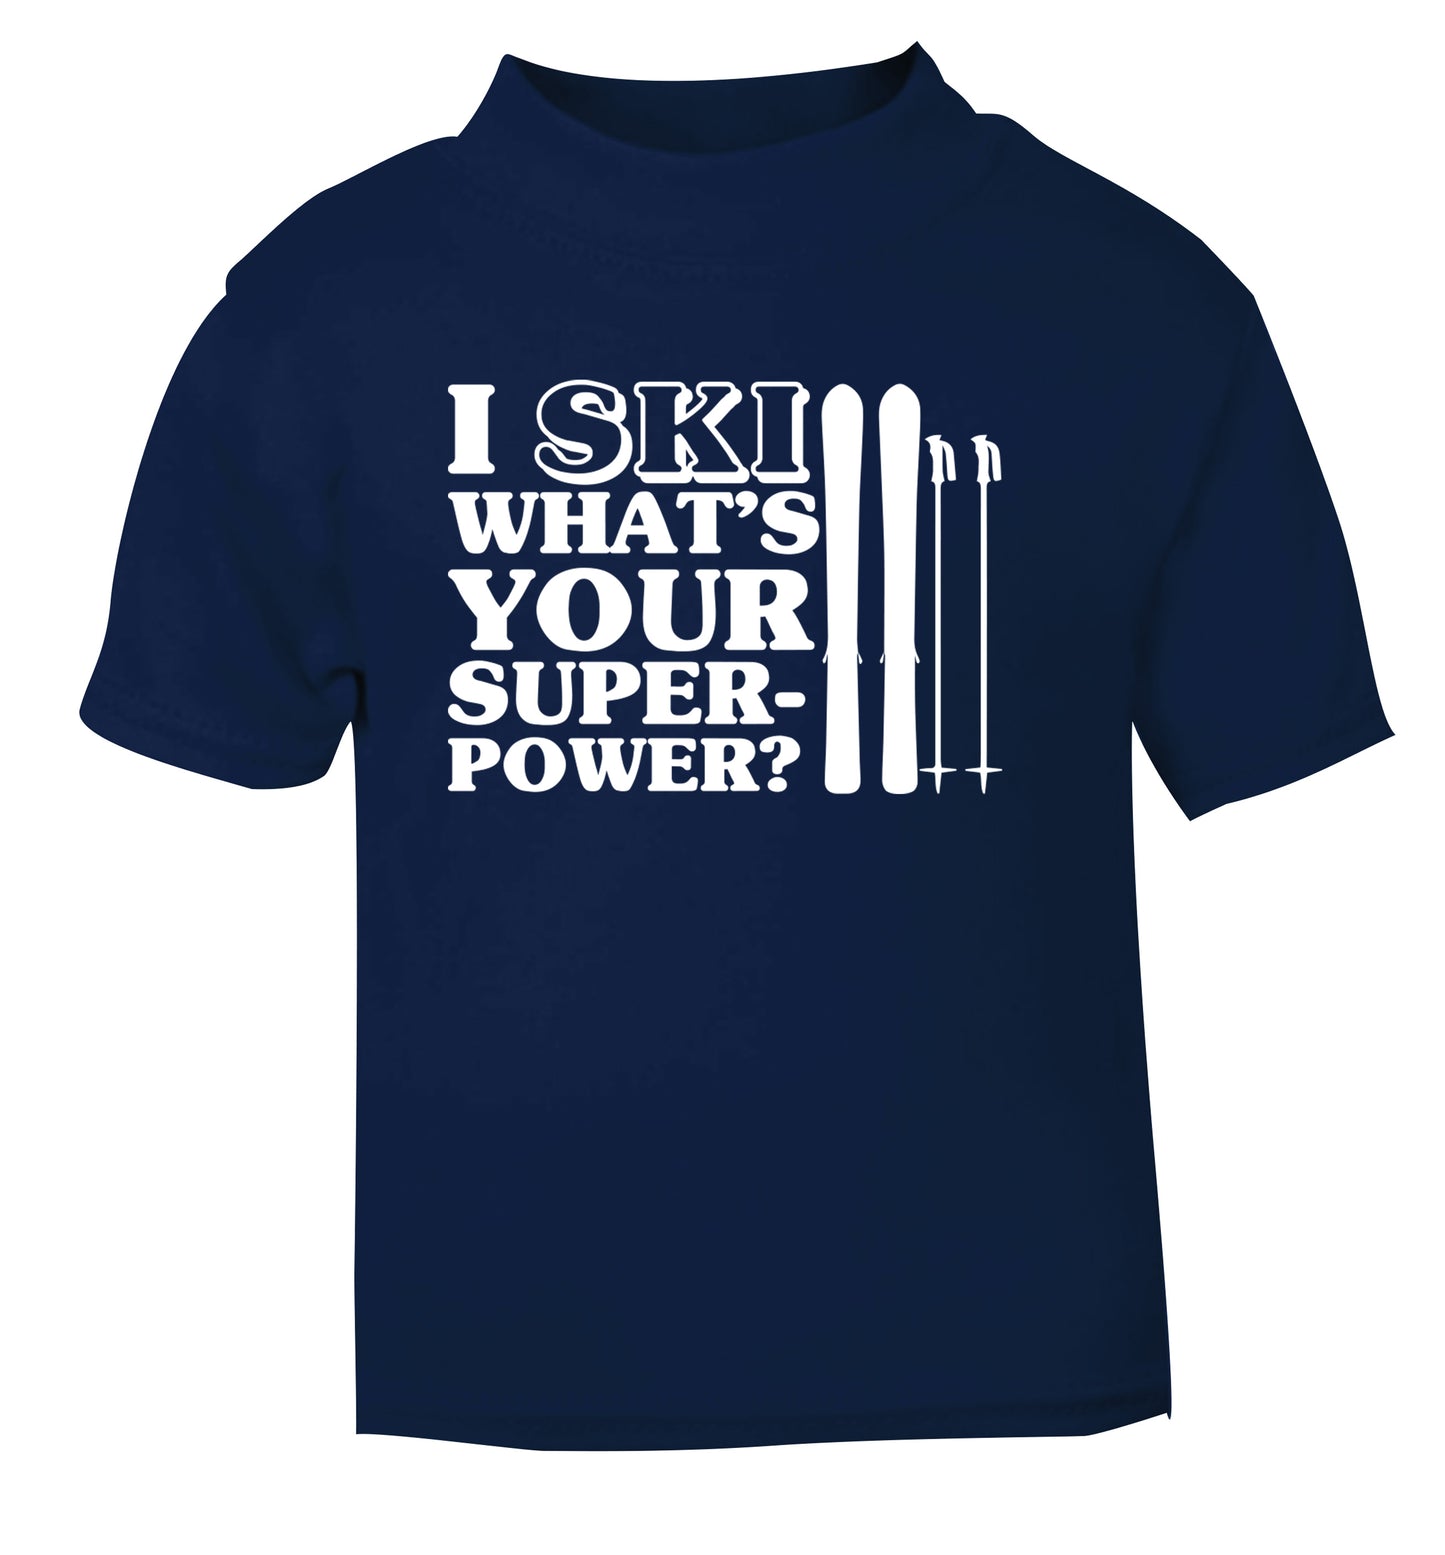 I ski what's your superpower? navy Baby Toddler Tshirt 2 Years